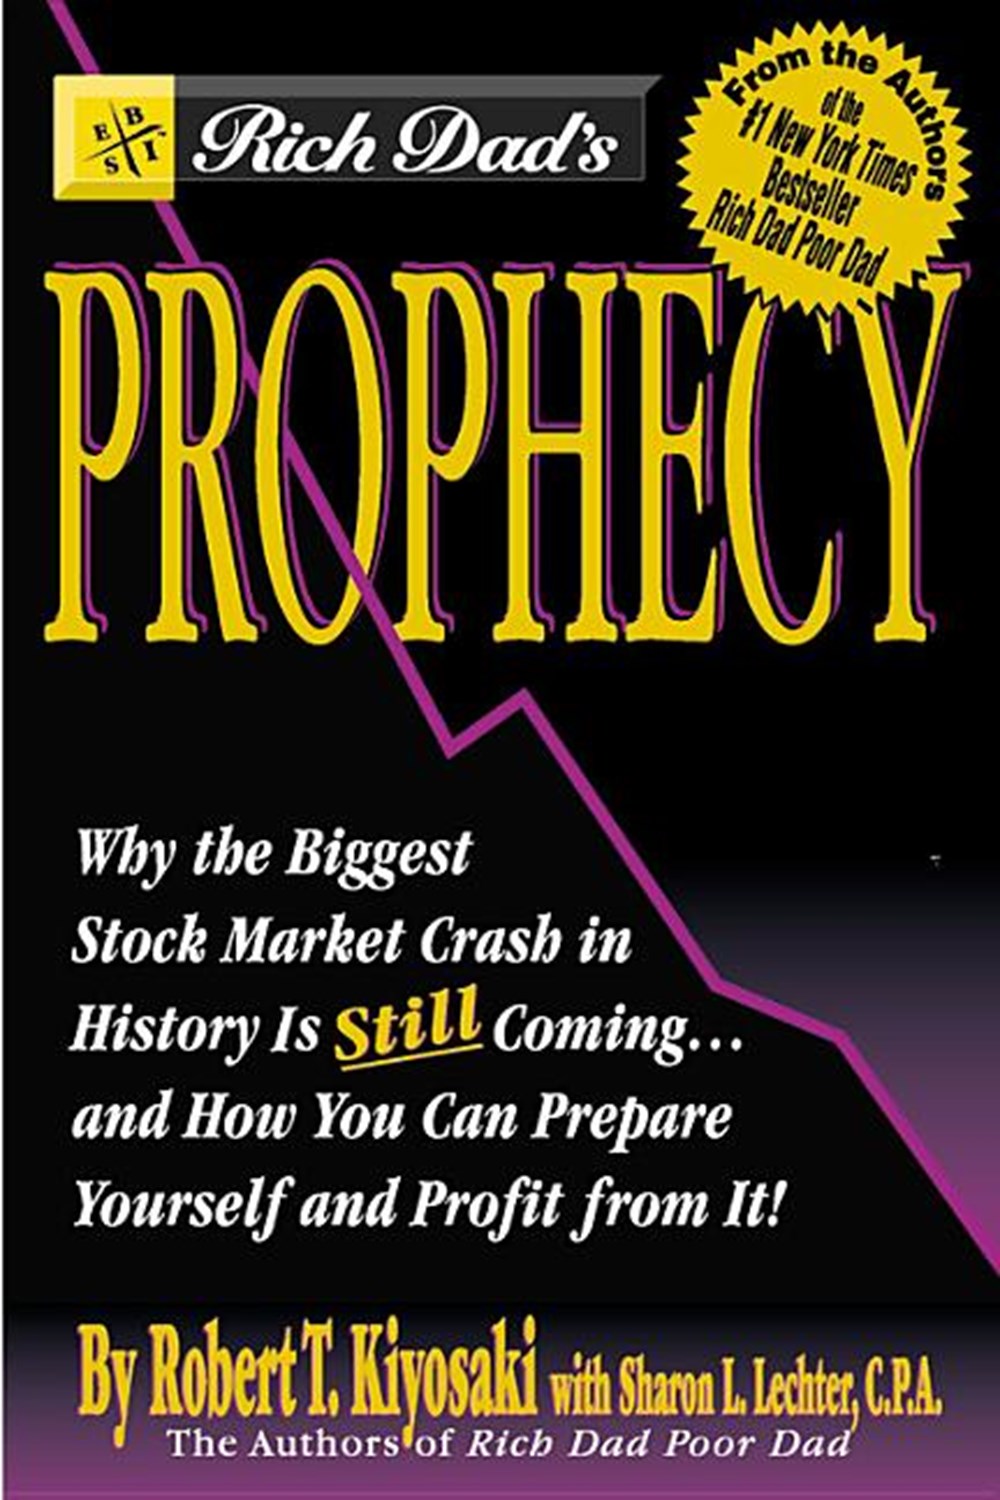 Rich Dad's Prophecy: Why the Biggest Stock Market Crash in History Is Still Coming...and How You Can